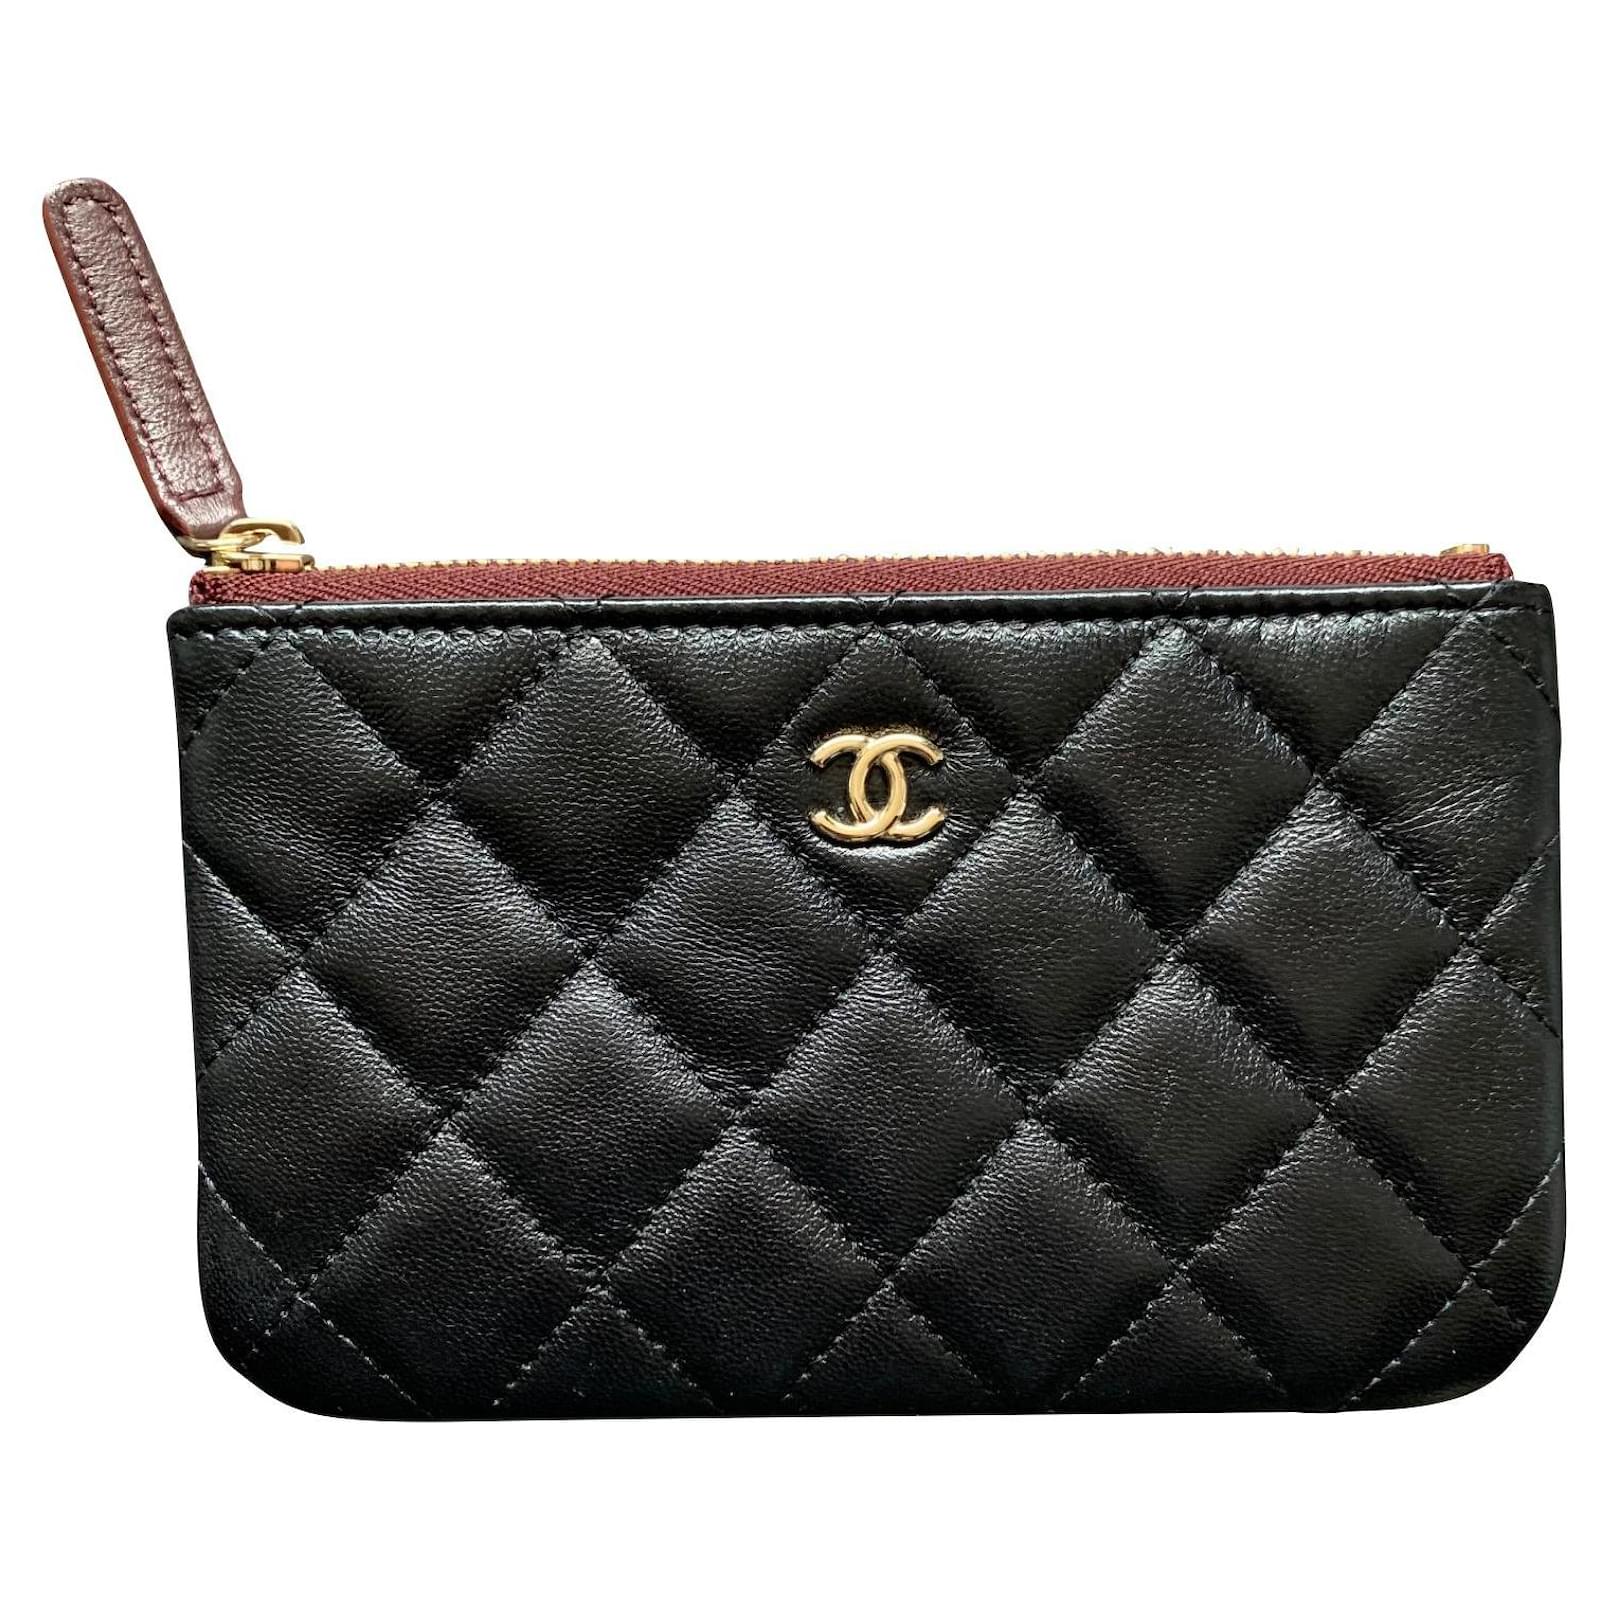 Chanel Timeless Classique Small Bag